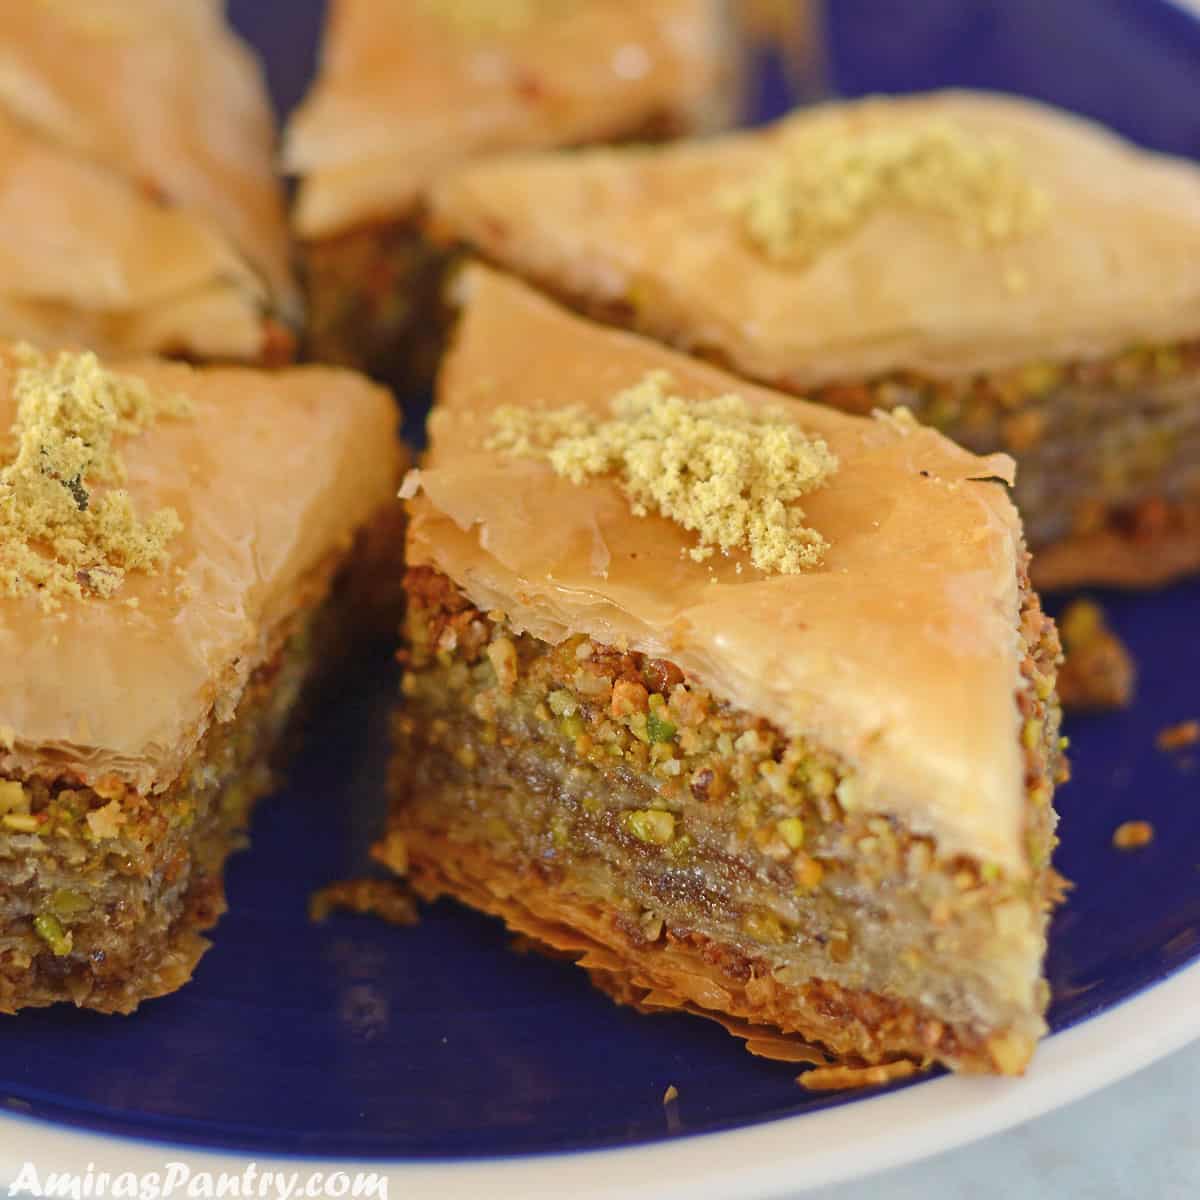 Baklava pieces placed on a blue plate and garnished with crushed pistachios.